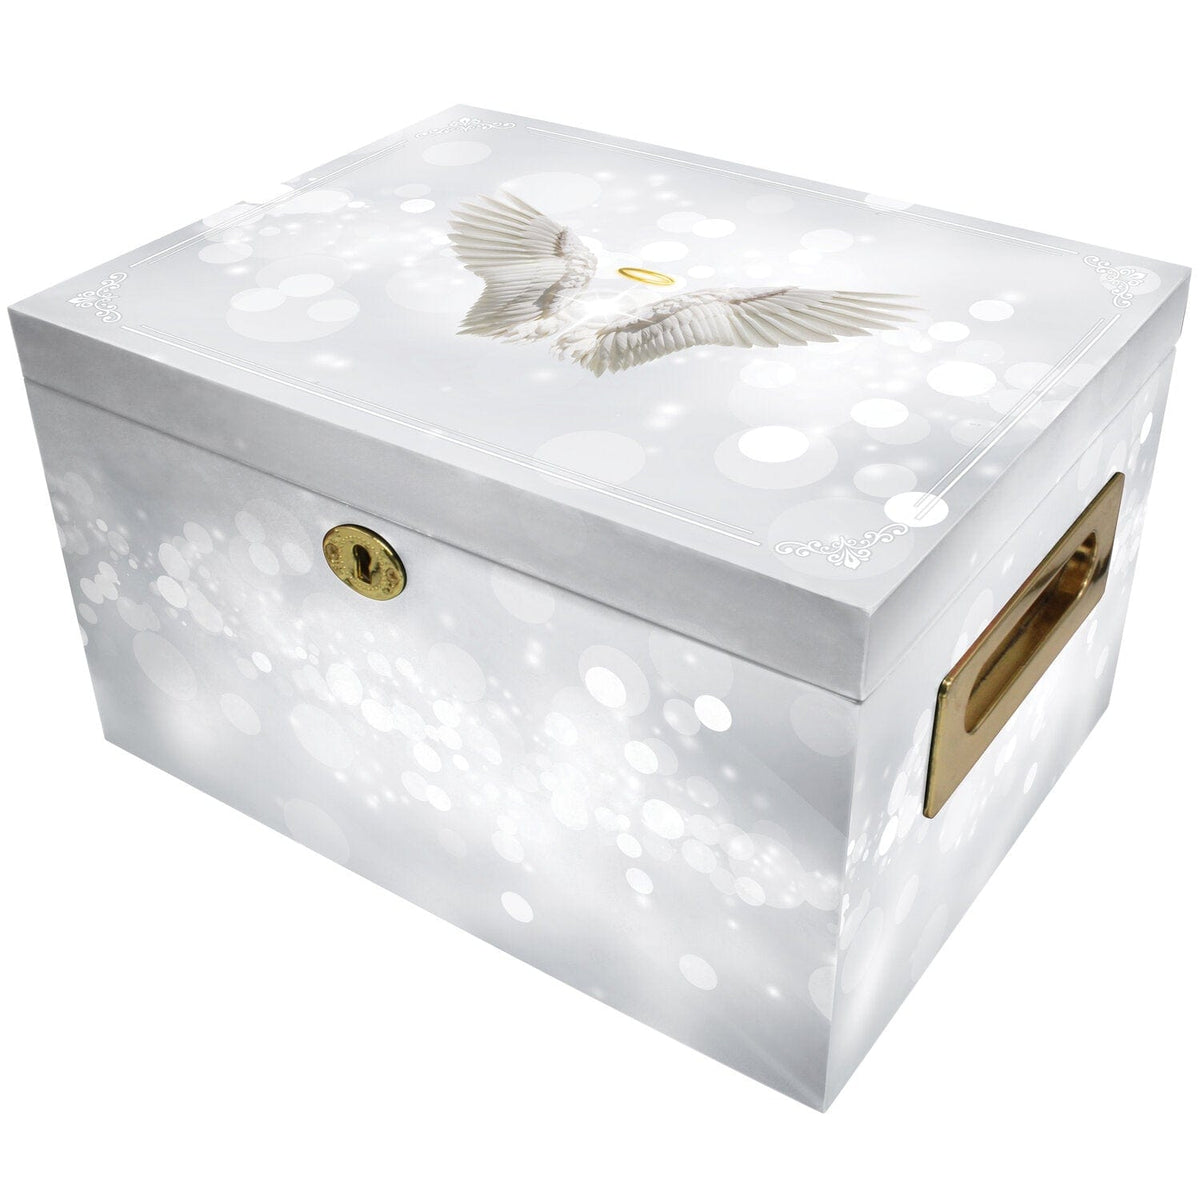 Commemorative Cremation Urns Home &amp; Garden Urn Collection Chest Angel of Mine (White) Memorial Collection Chest Cremation Urn